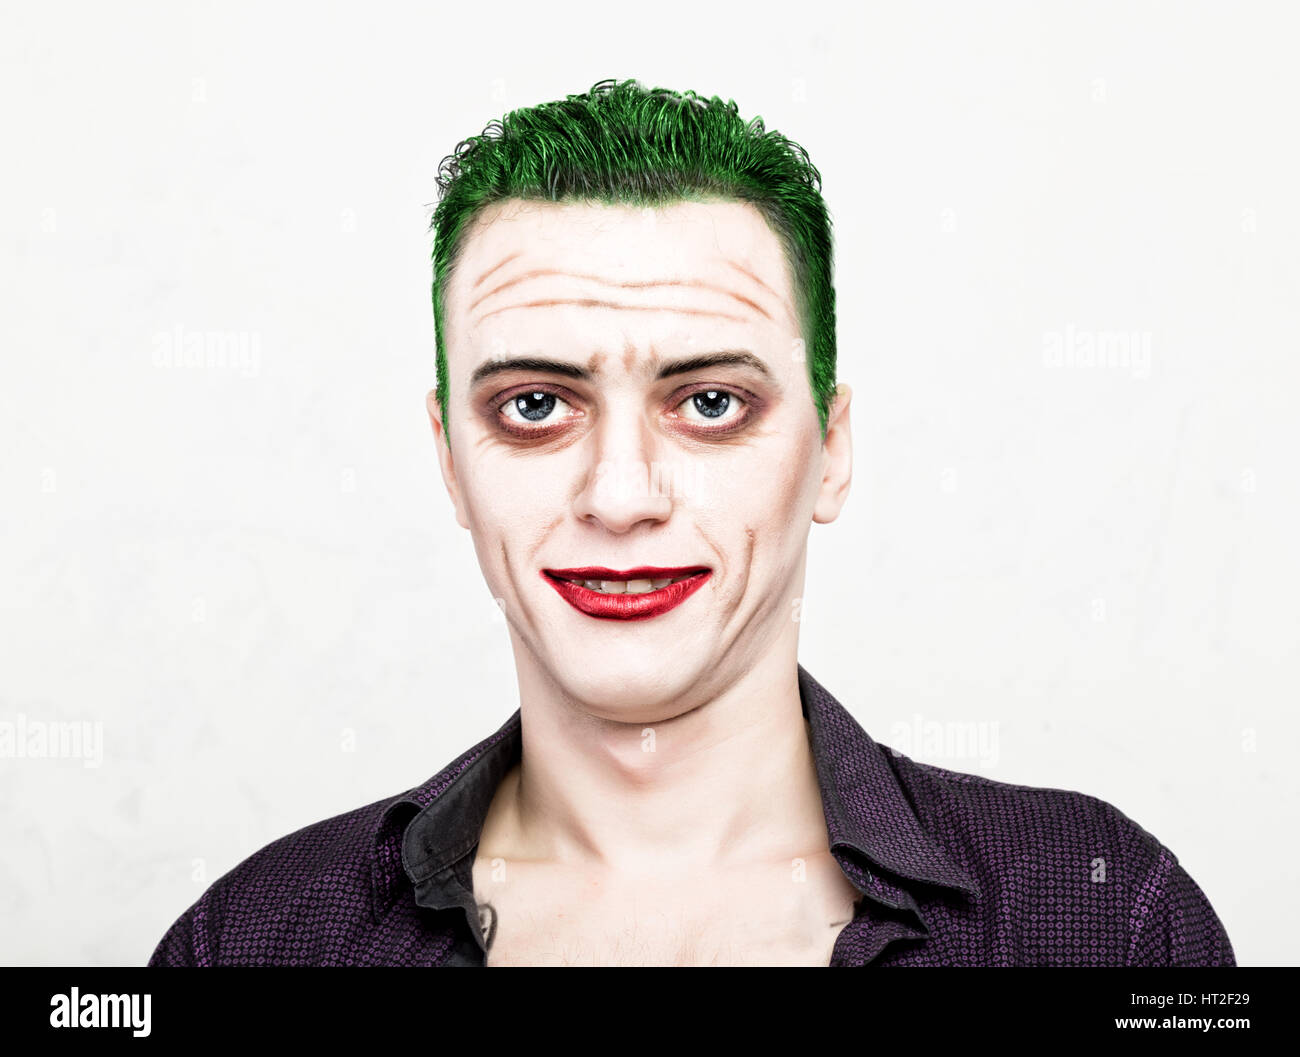 guy with crazy joker face, green hair and idiotic smike. carnaval costume. Stock Photo